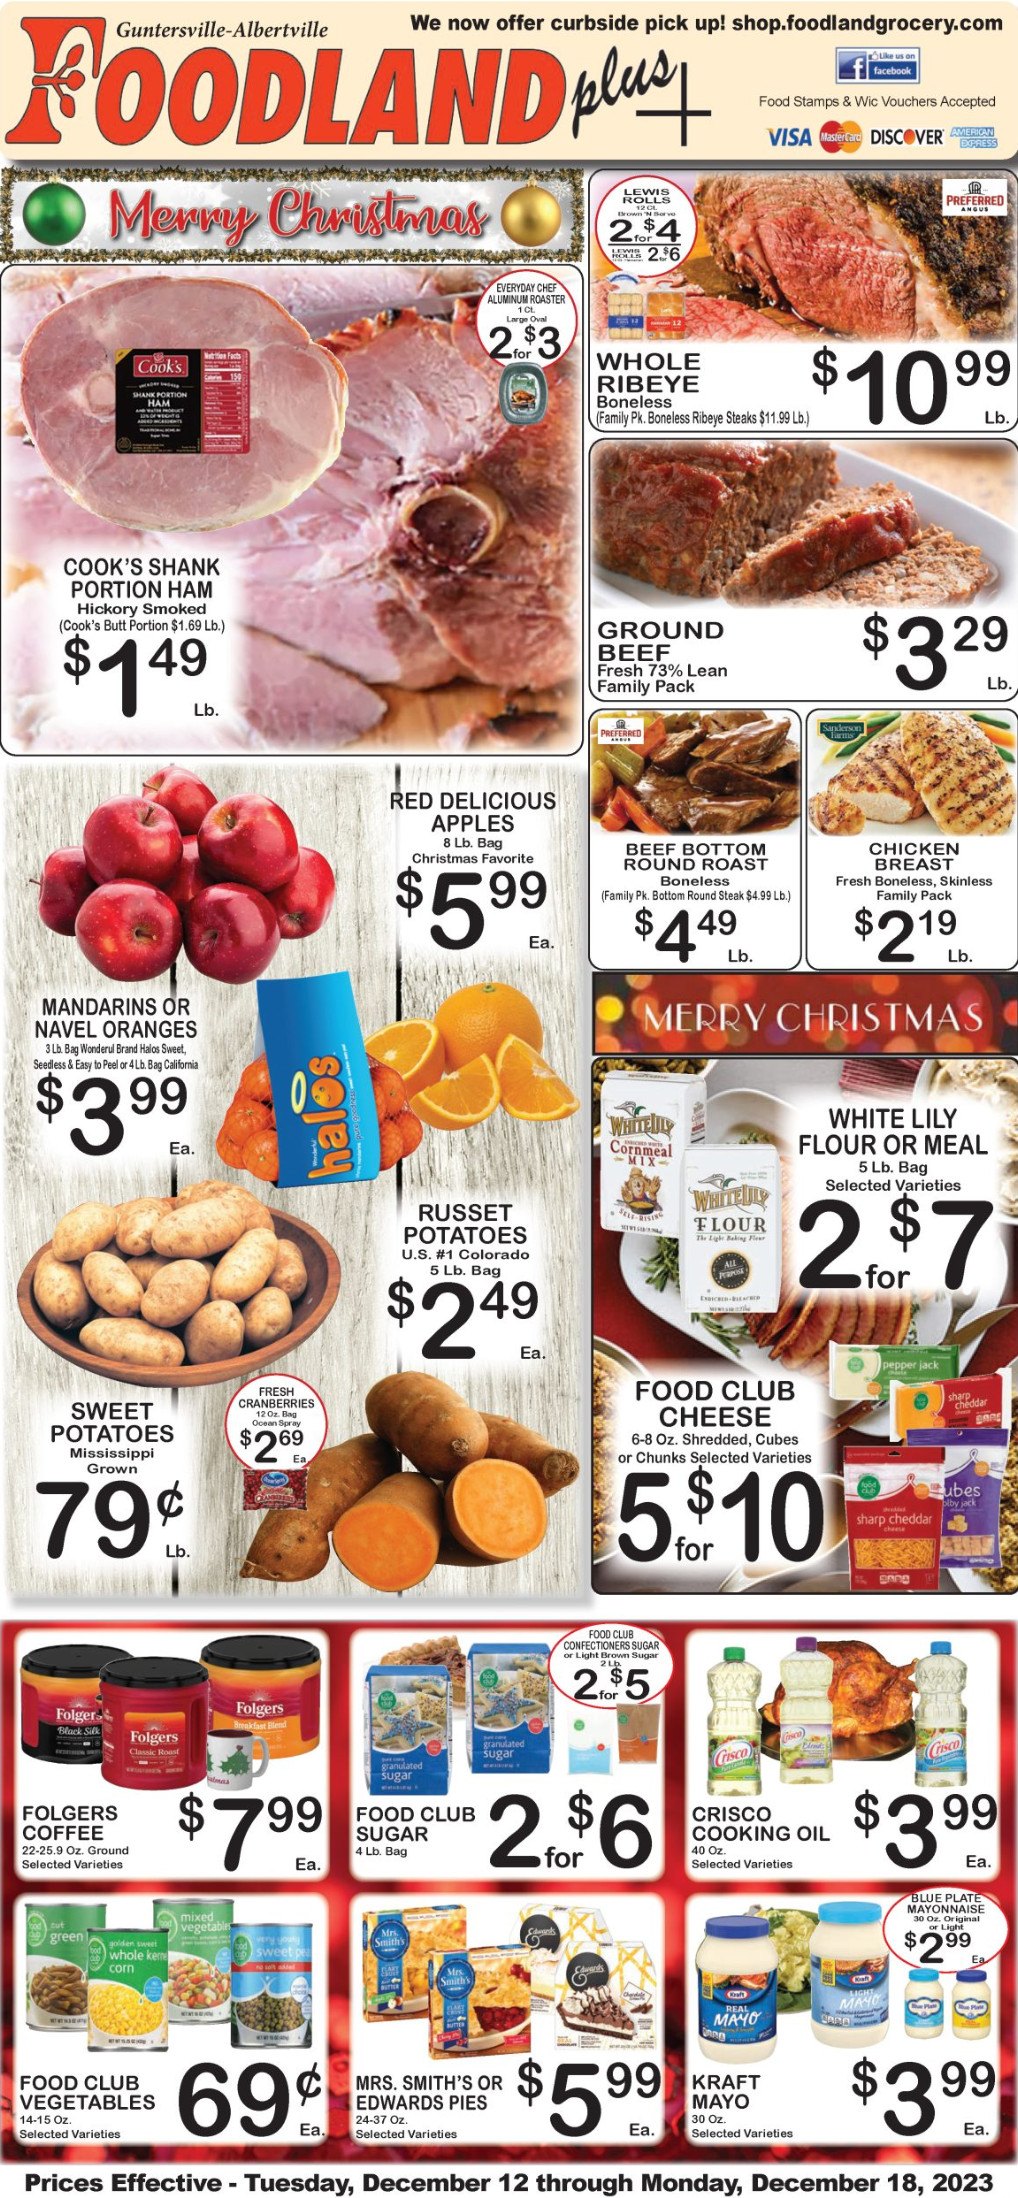 Foodland(US) Weekly Ad Dec 12 – Dec 18, 2023 (Christmas Promotion Included)